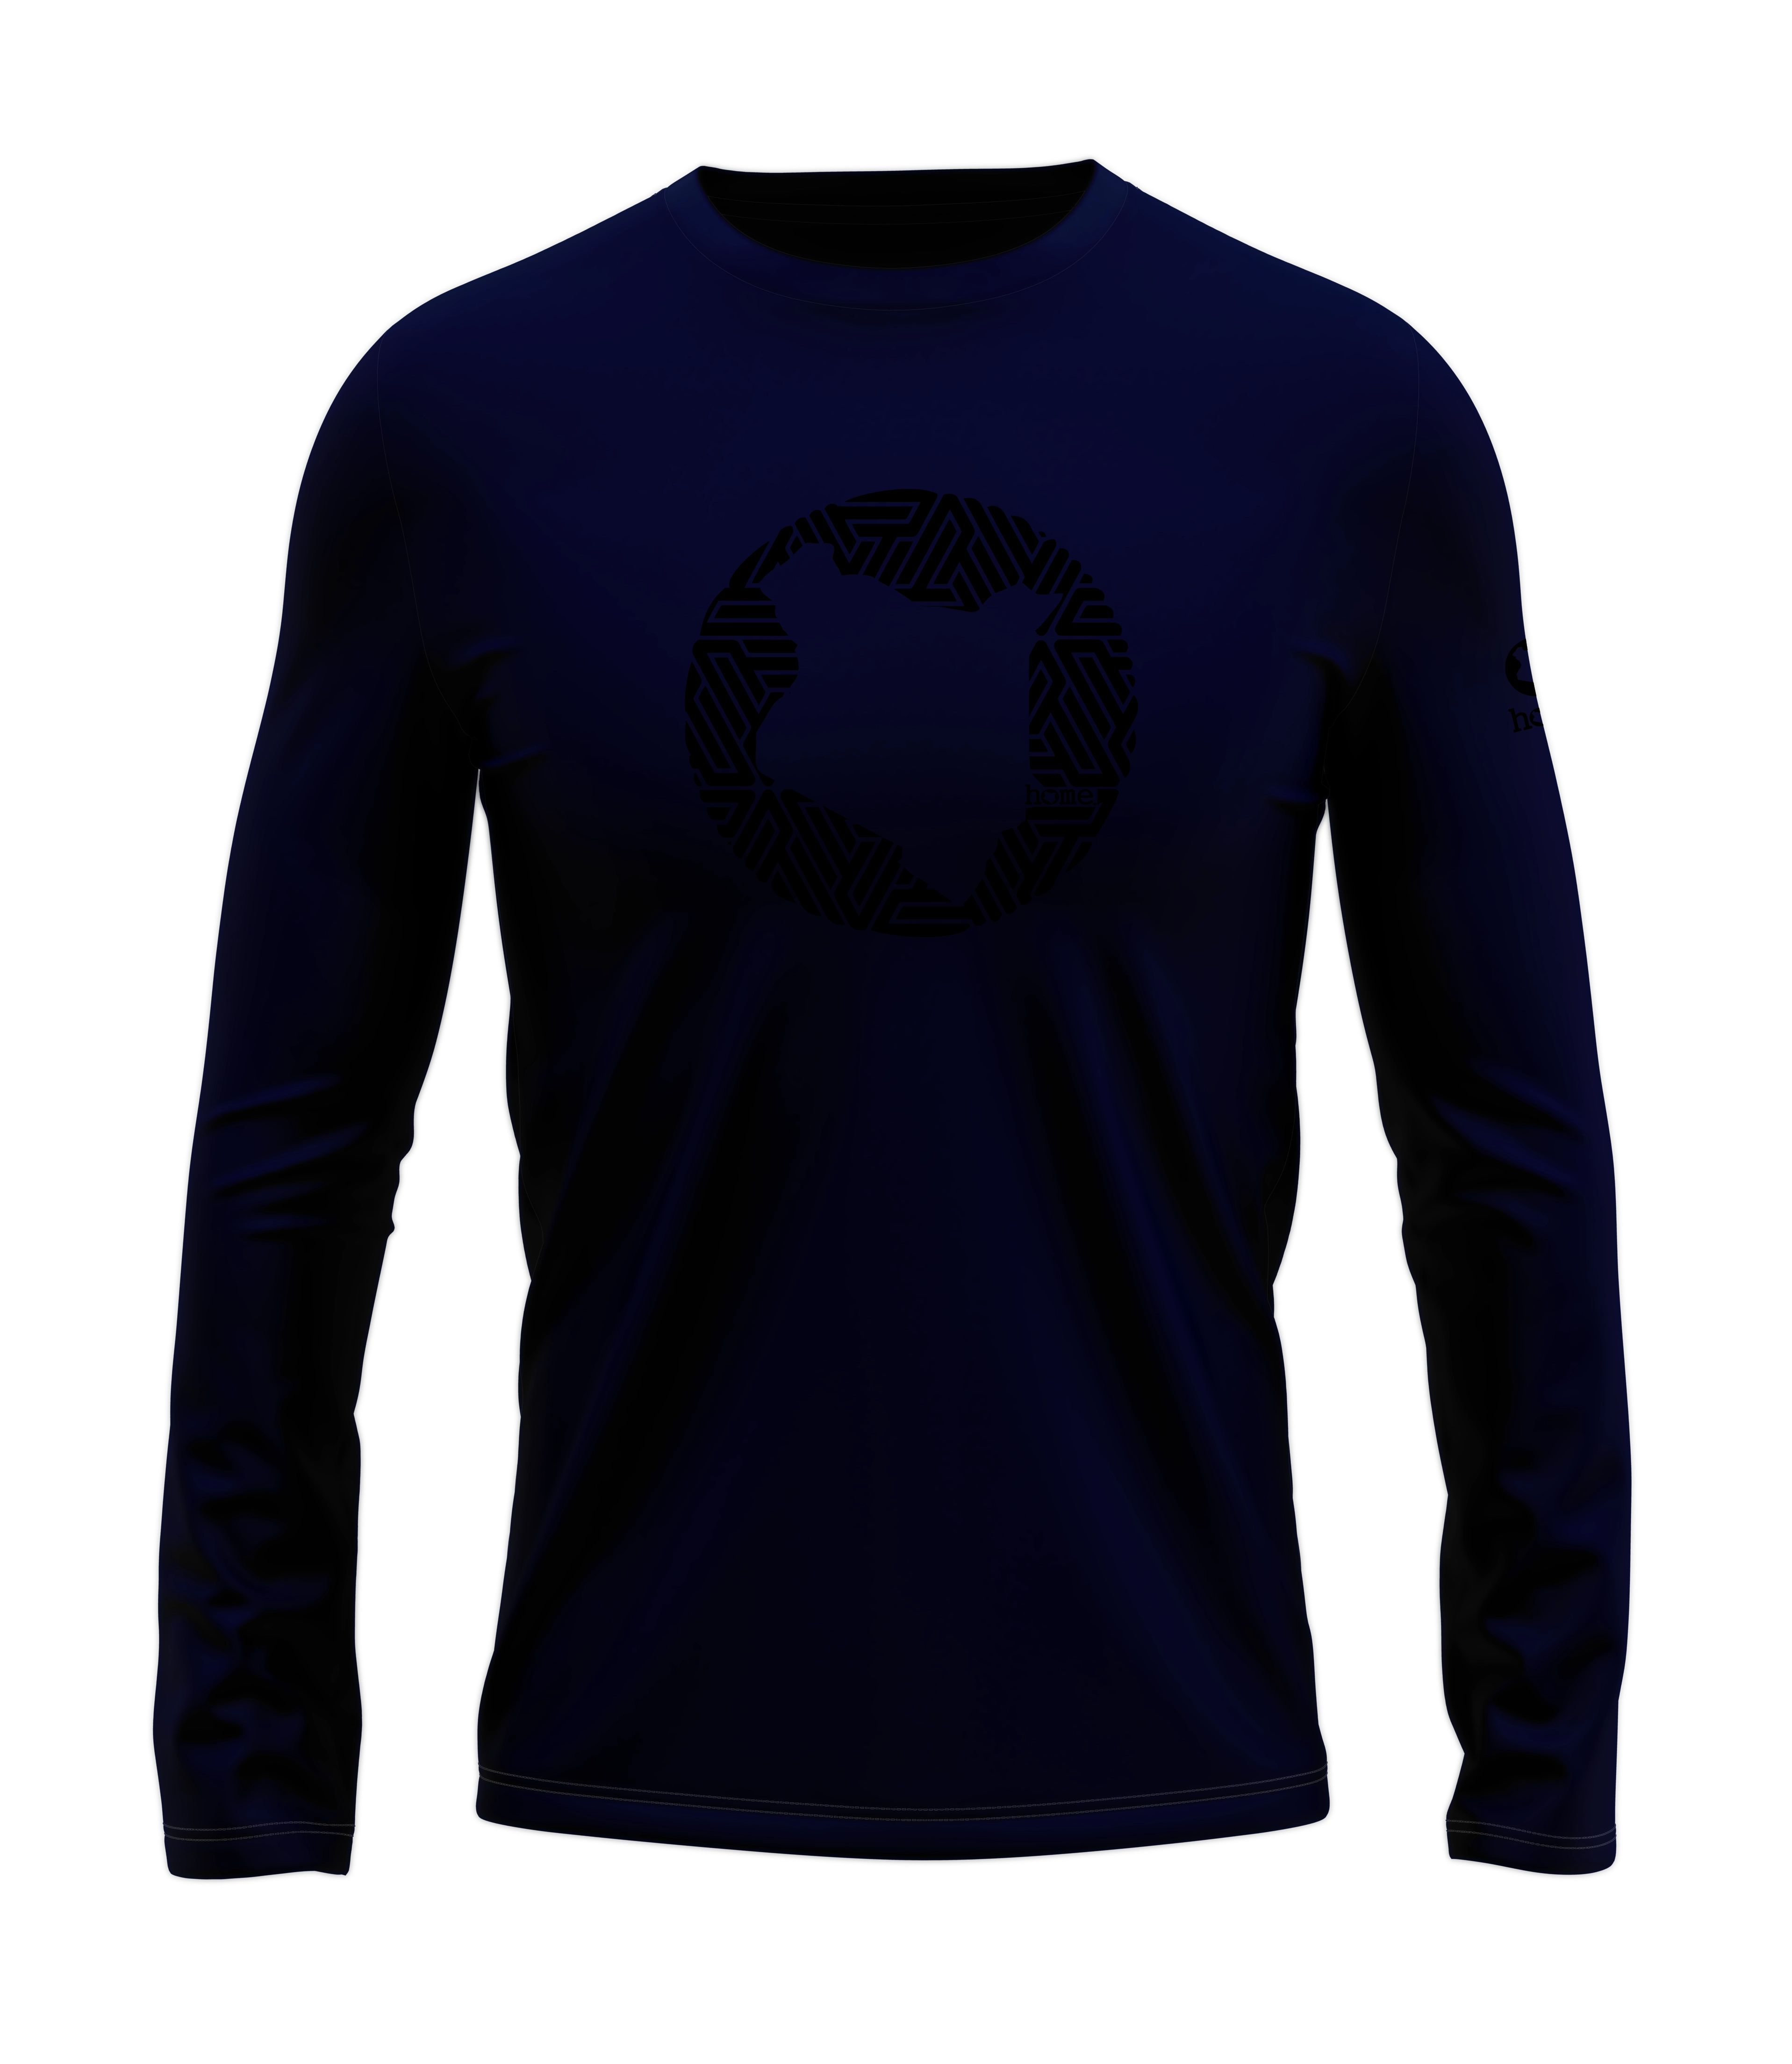 home_254 LONG-SLEEVED NAVY BLUE T-SHIRT WITH A BLACK MAP PRINT – COTTON PLUS FABRIC